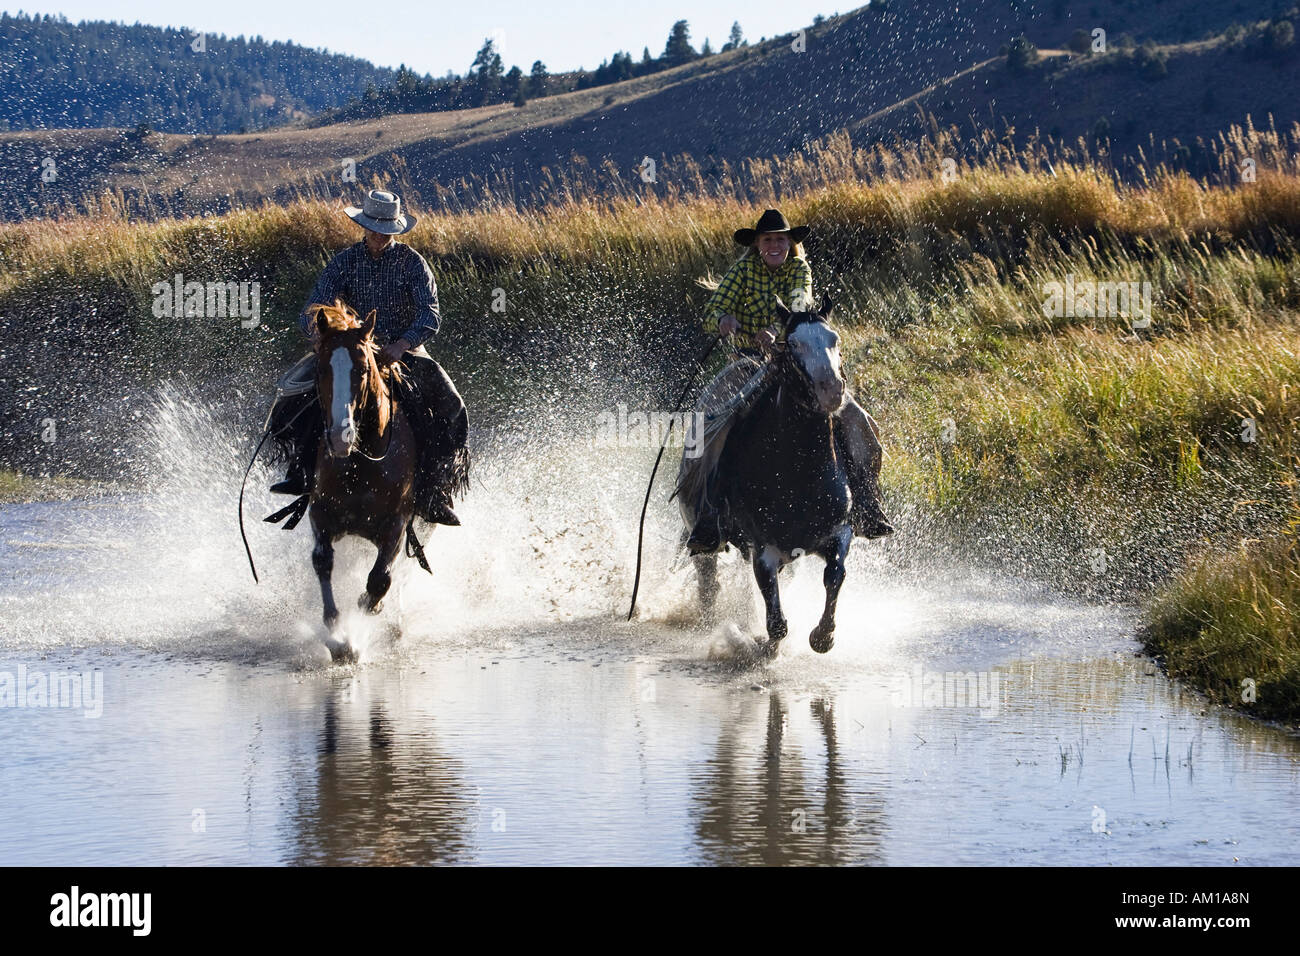 Cowgirl and cowboy riding in water, Oregon, USA Stock Photo